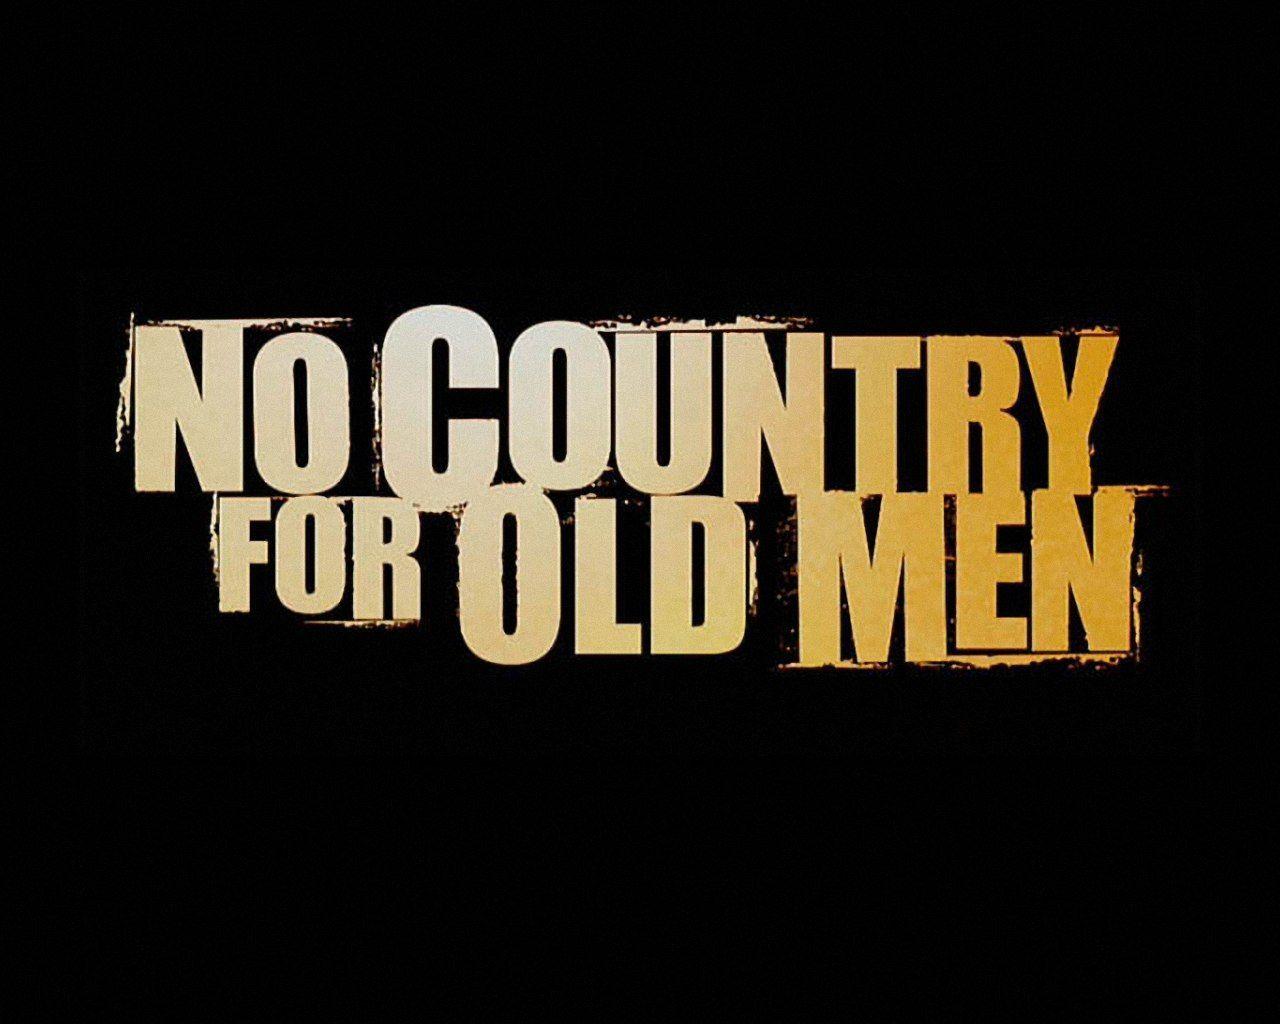 no country for old men 1280x1024 Wallpaper, 1280x1024 Wallpaper